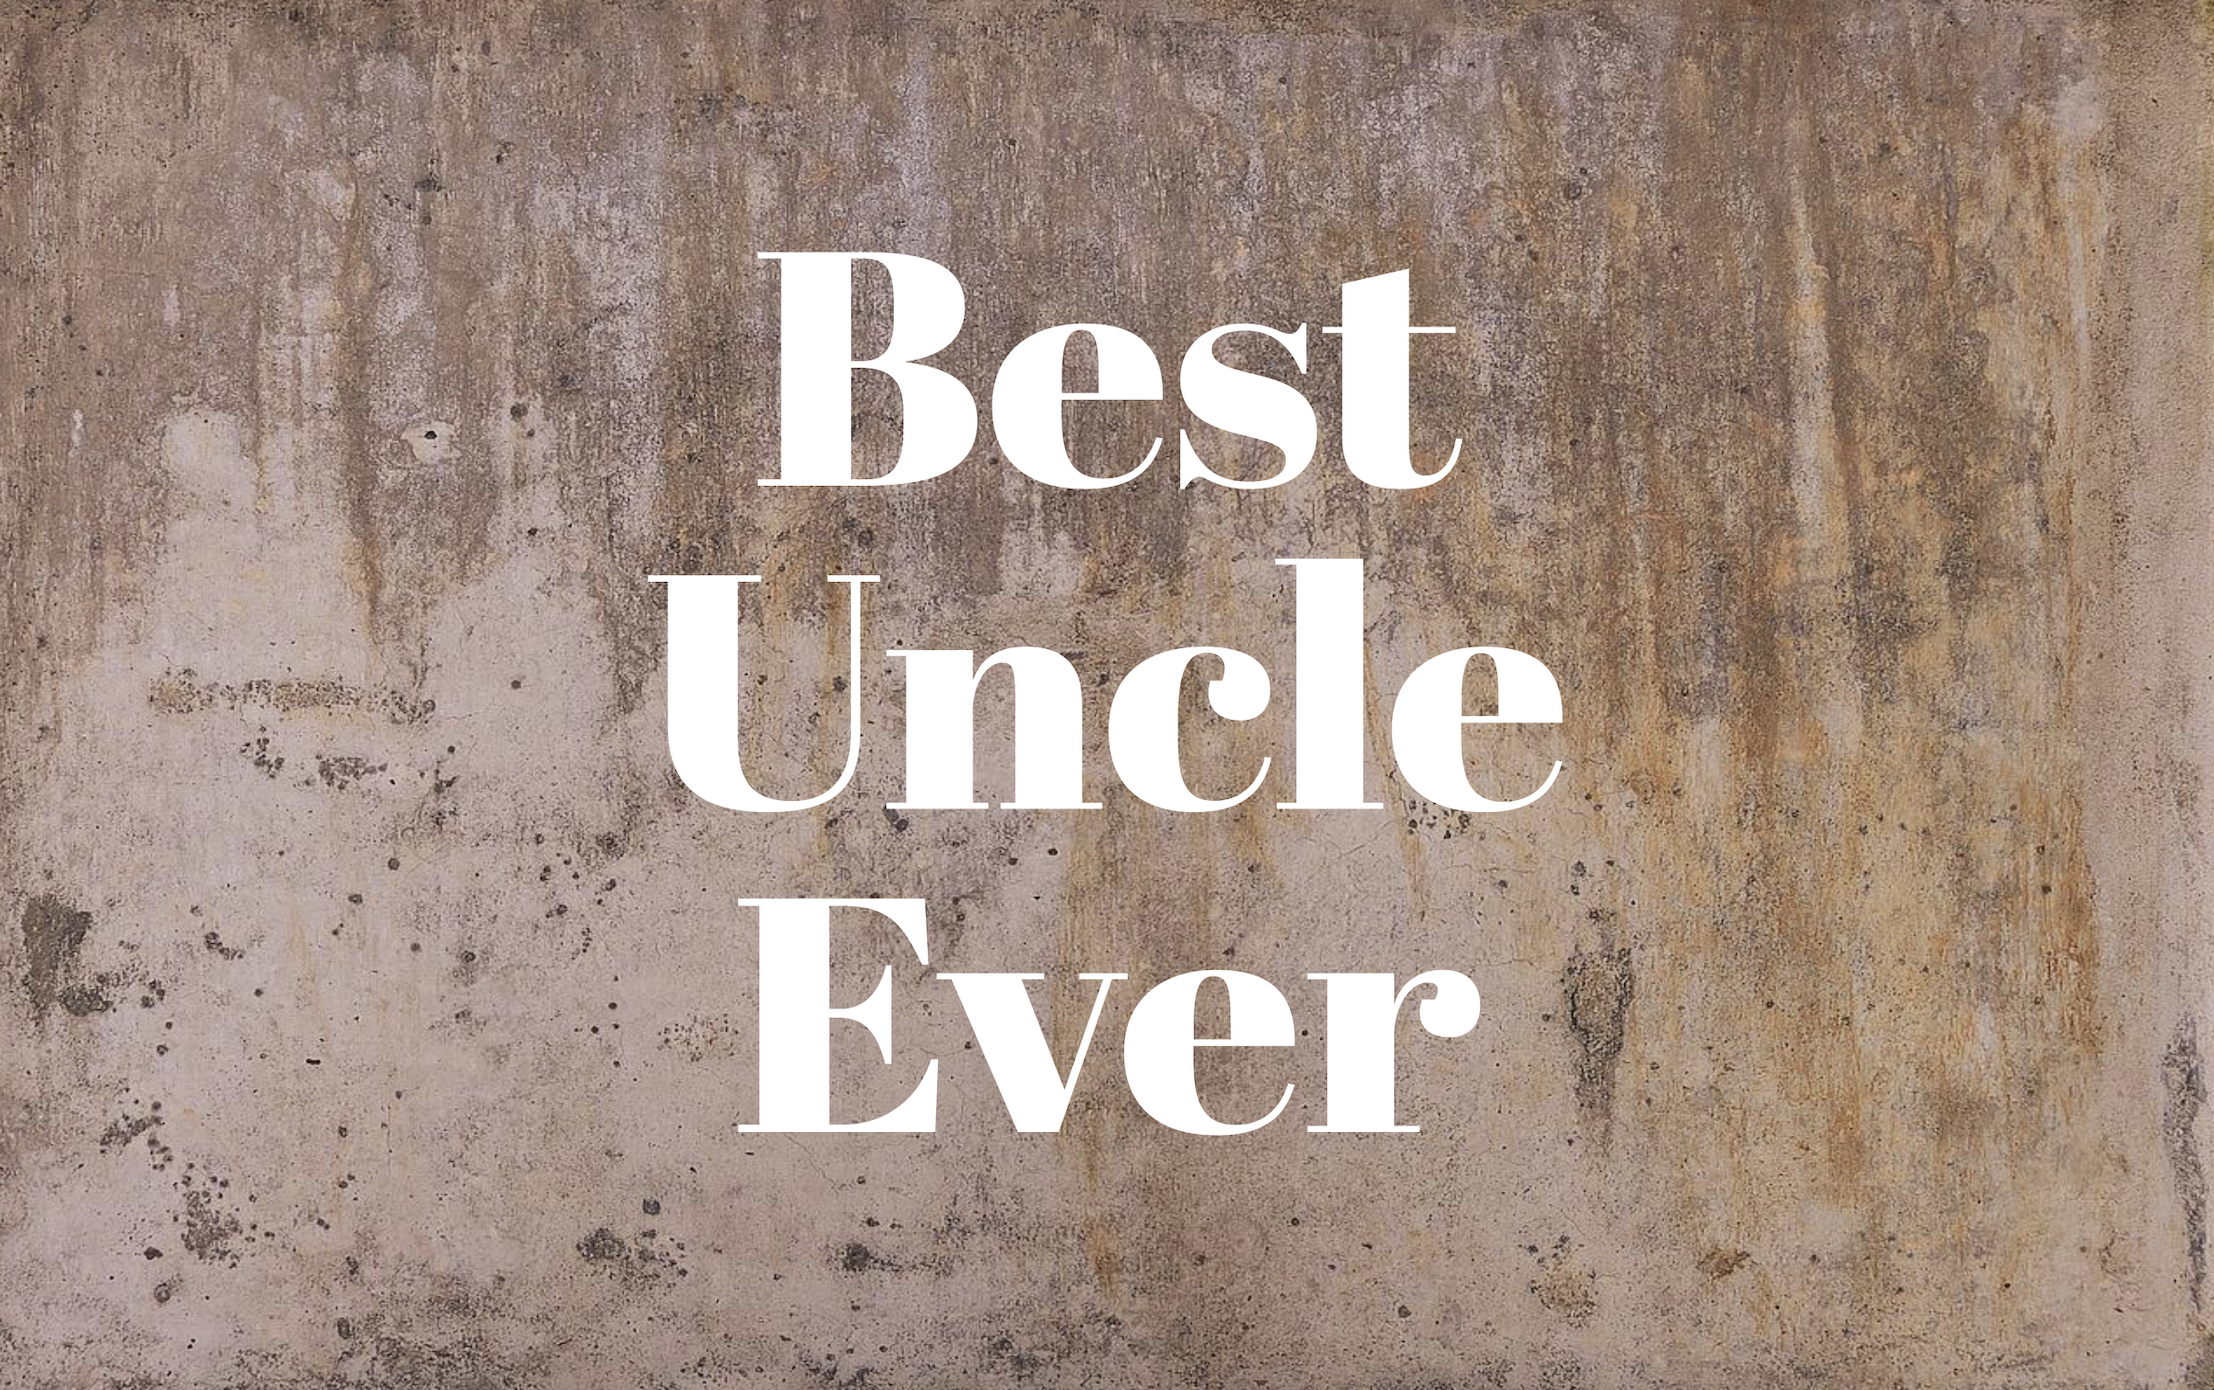 Best Uncle Ever Decal - Holiday Uncle/Father/Dad/Dada/Daddy/Brother Vinyl Decals for Home, Gifts, Businesses and More! B8